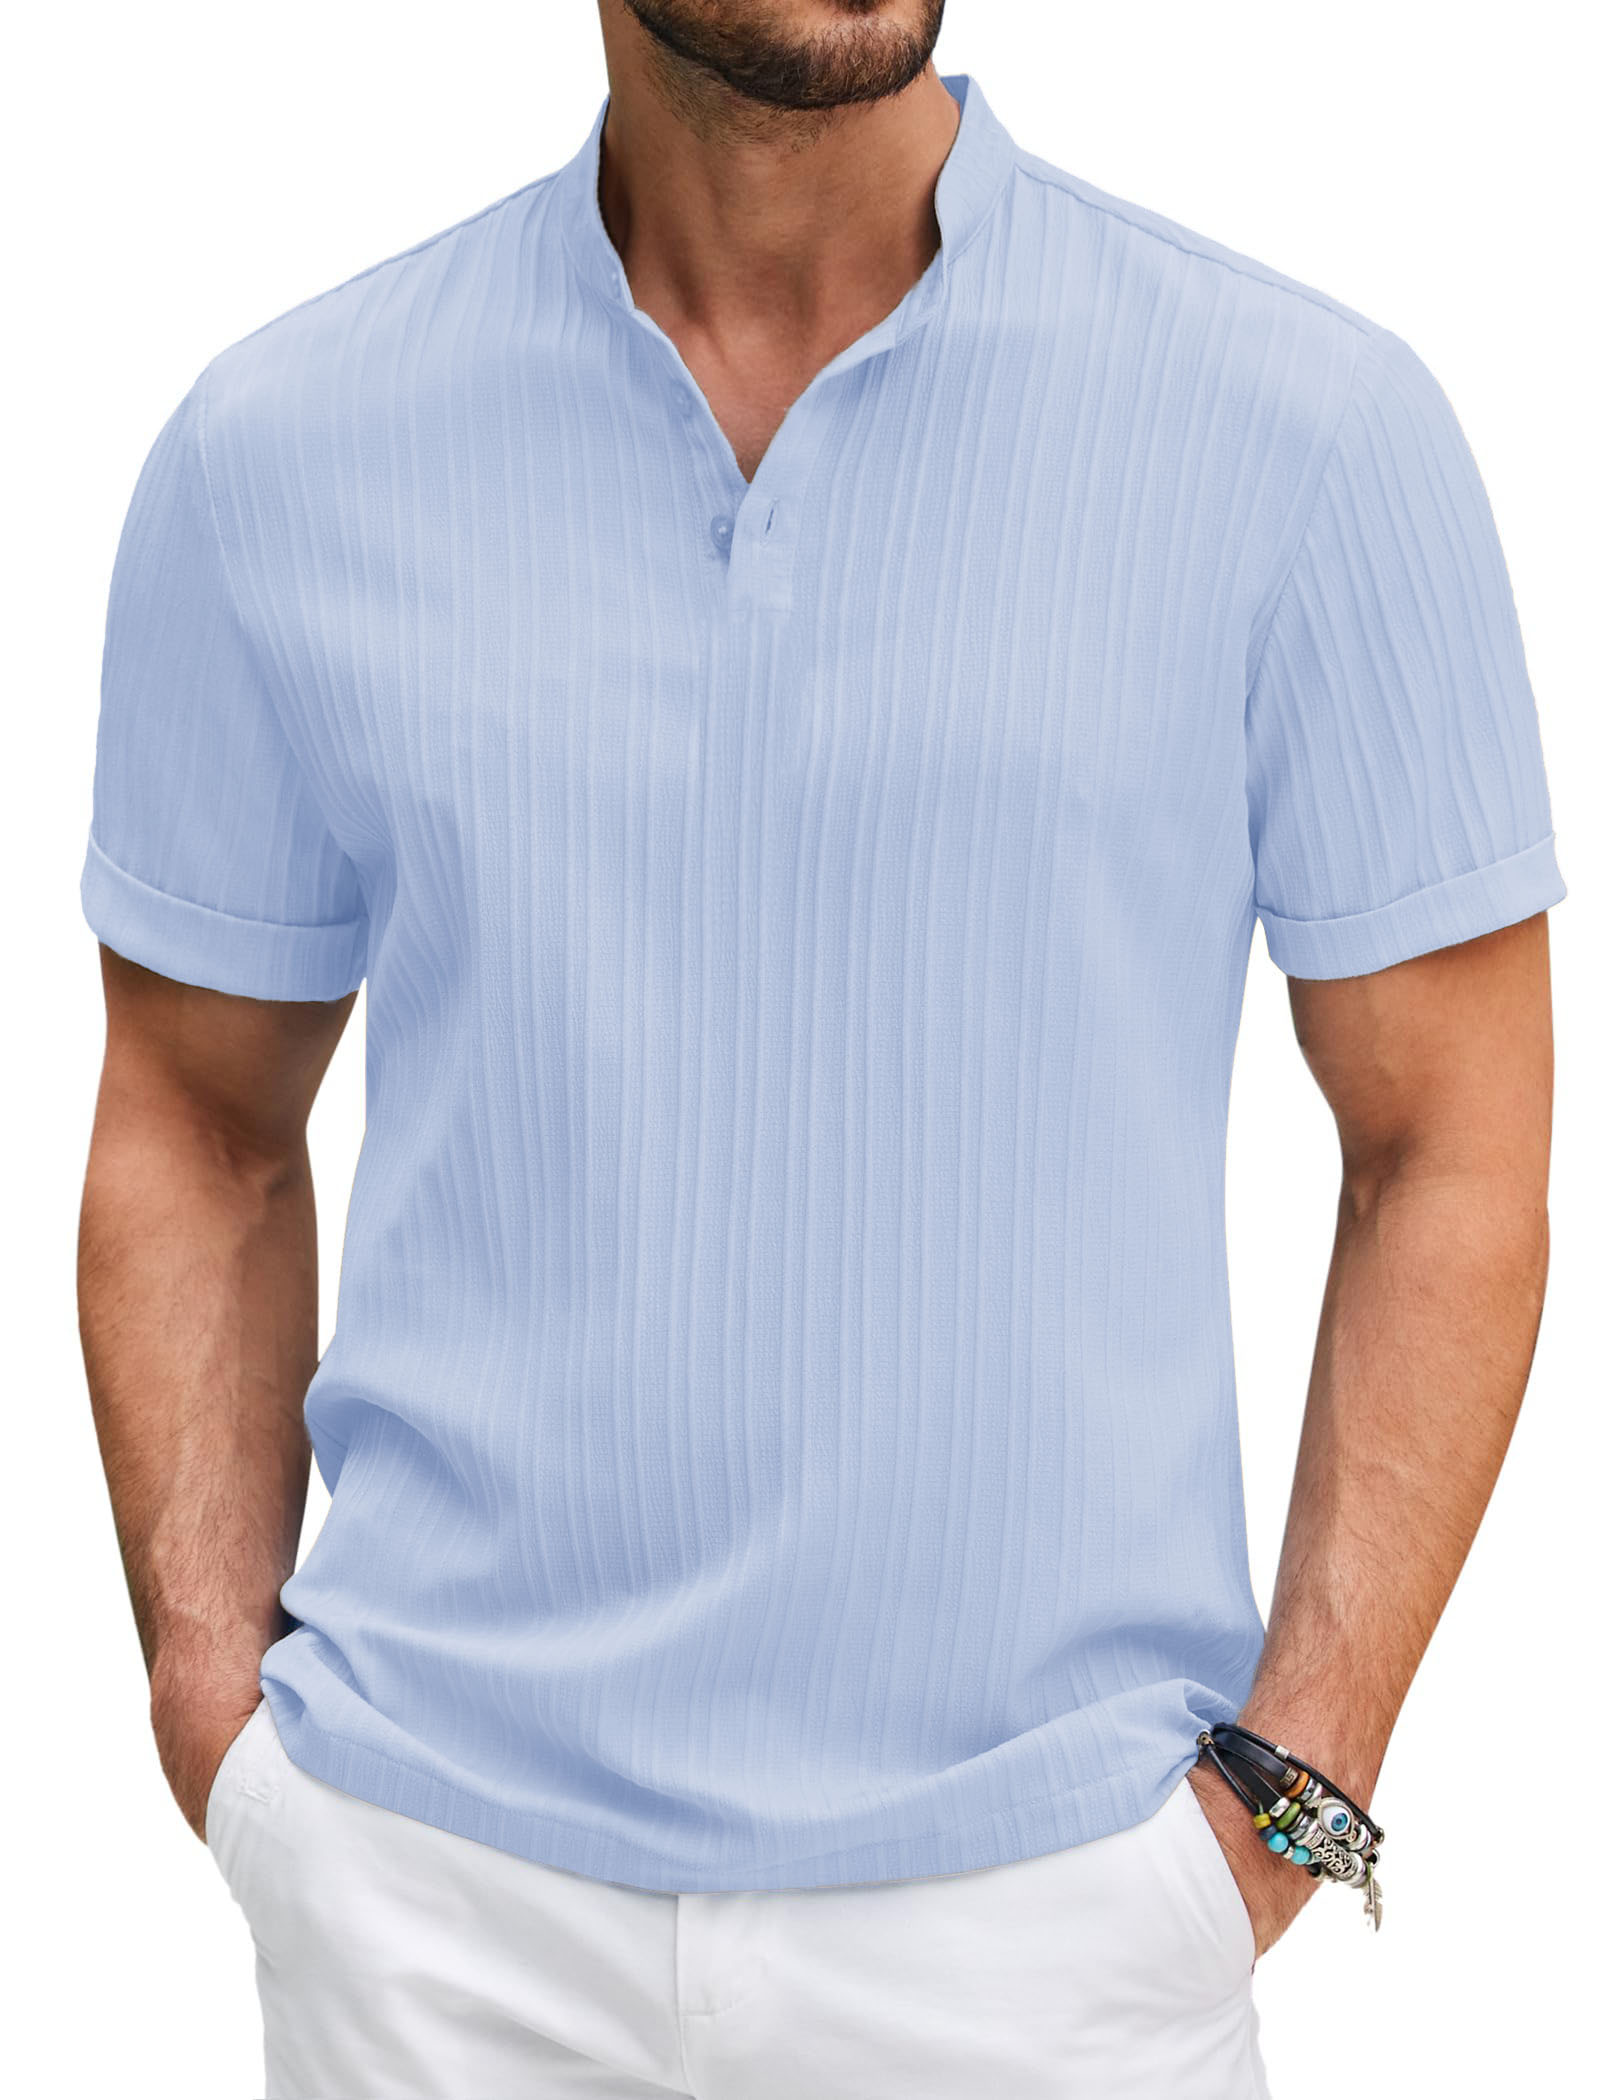 Men's Casual Fashion Striped Short Sleeve Tops